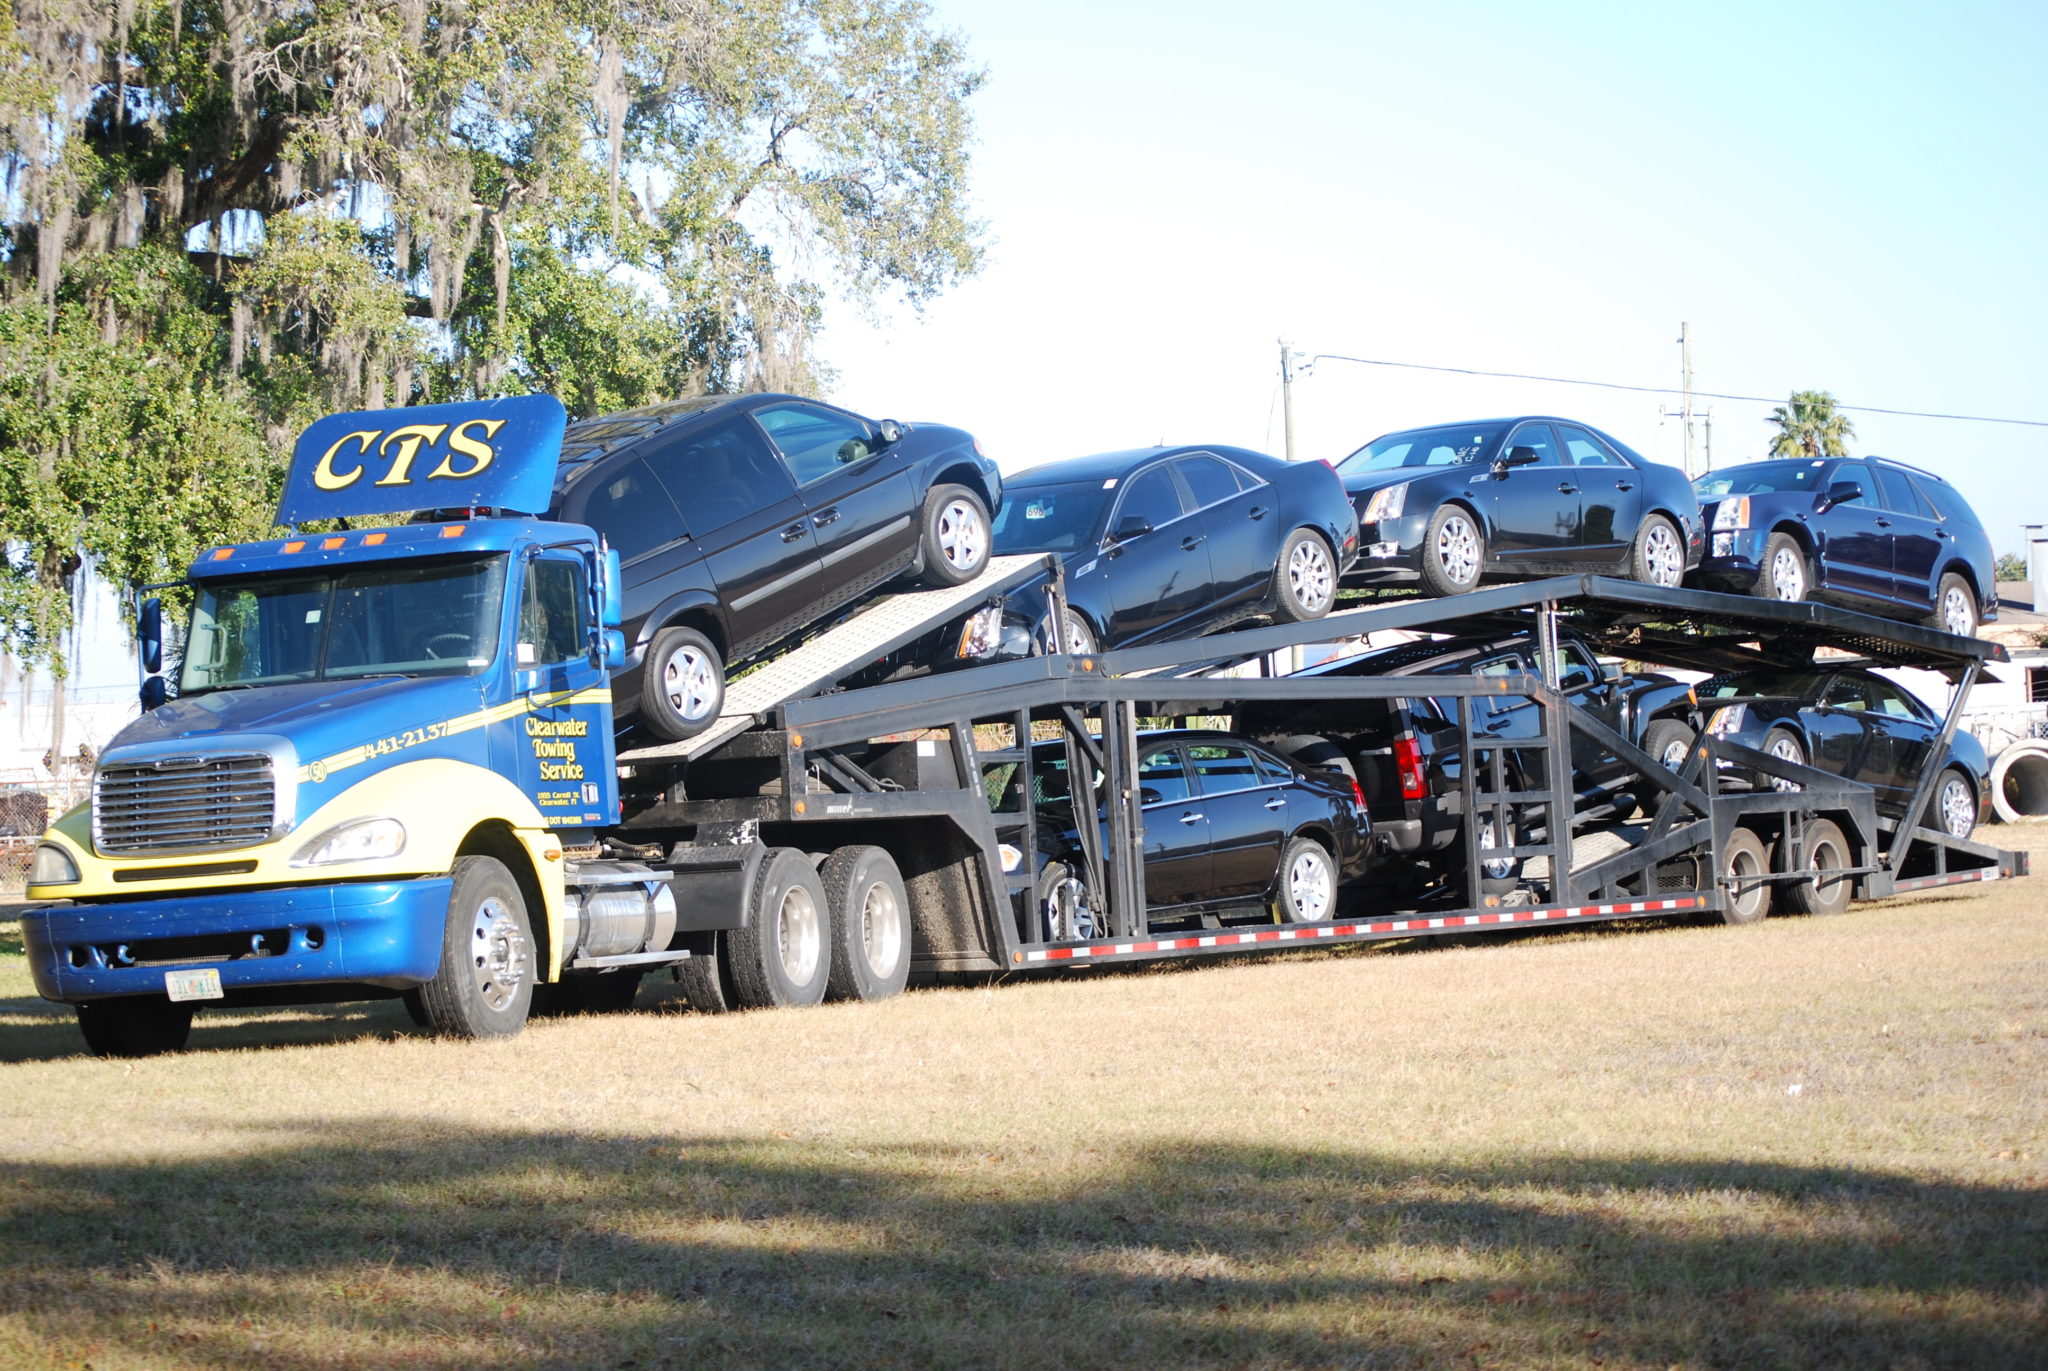 7 Car Hauler Transporting Vehicles - Commercial Towing